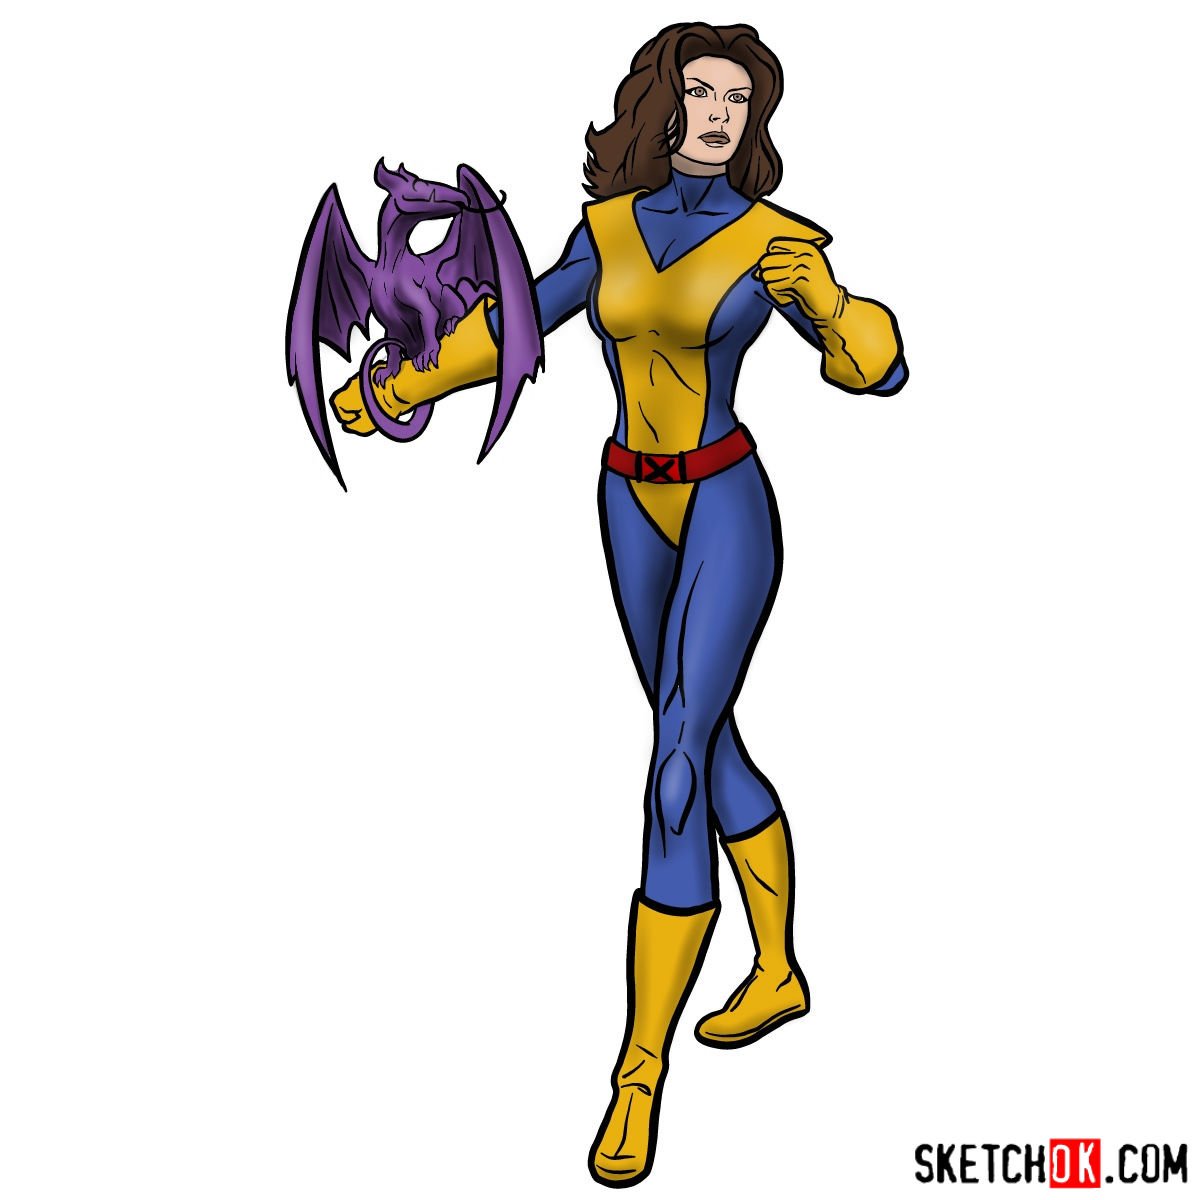 How to draw Kitty Pryde with a dragon - Sketchok easy drawing guides